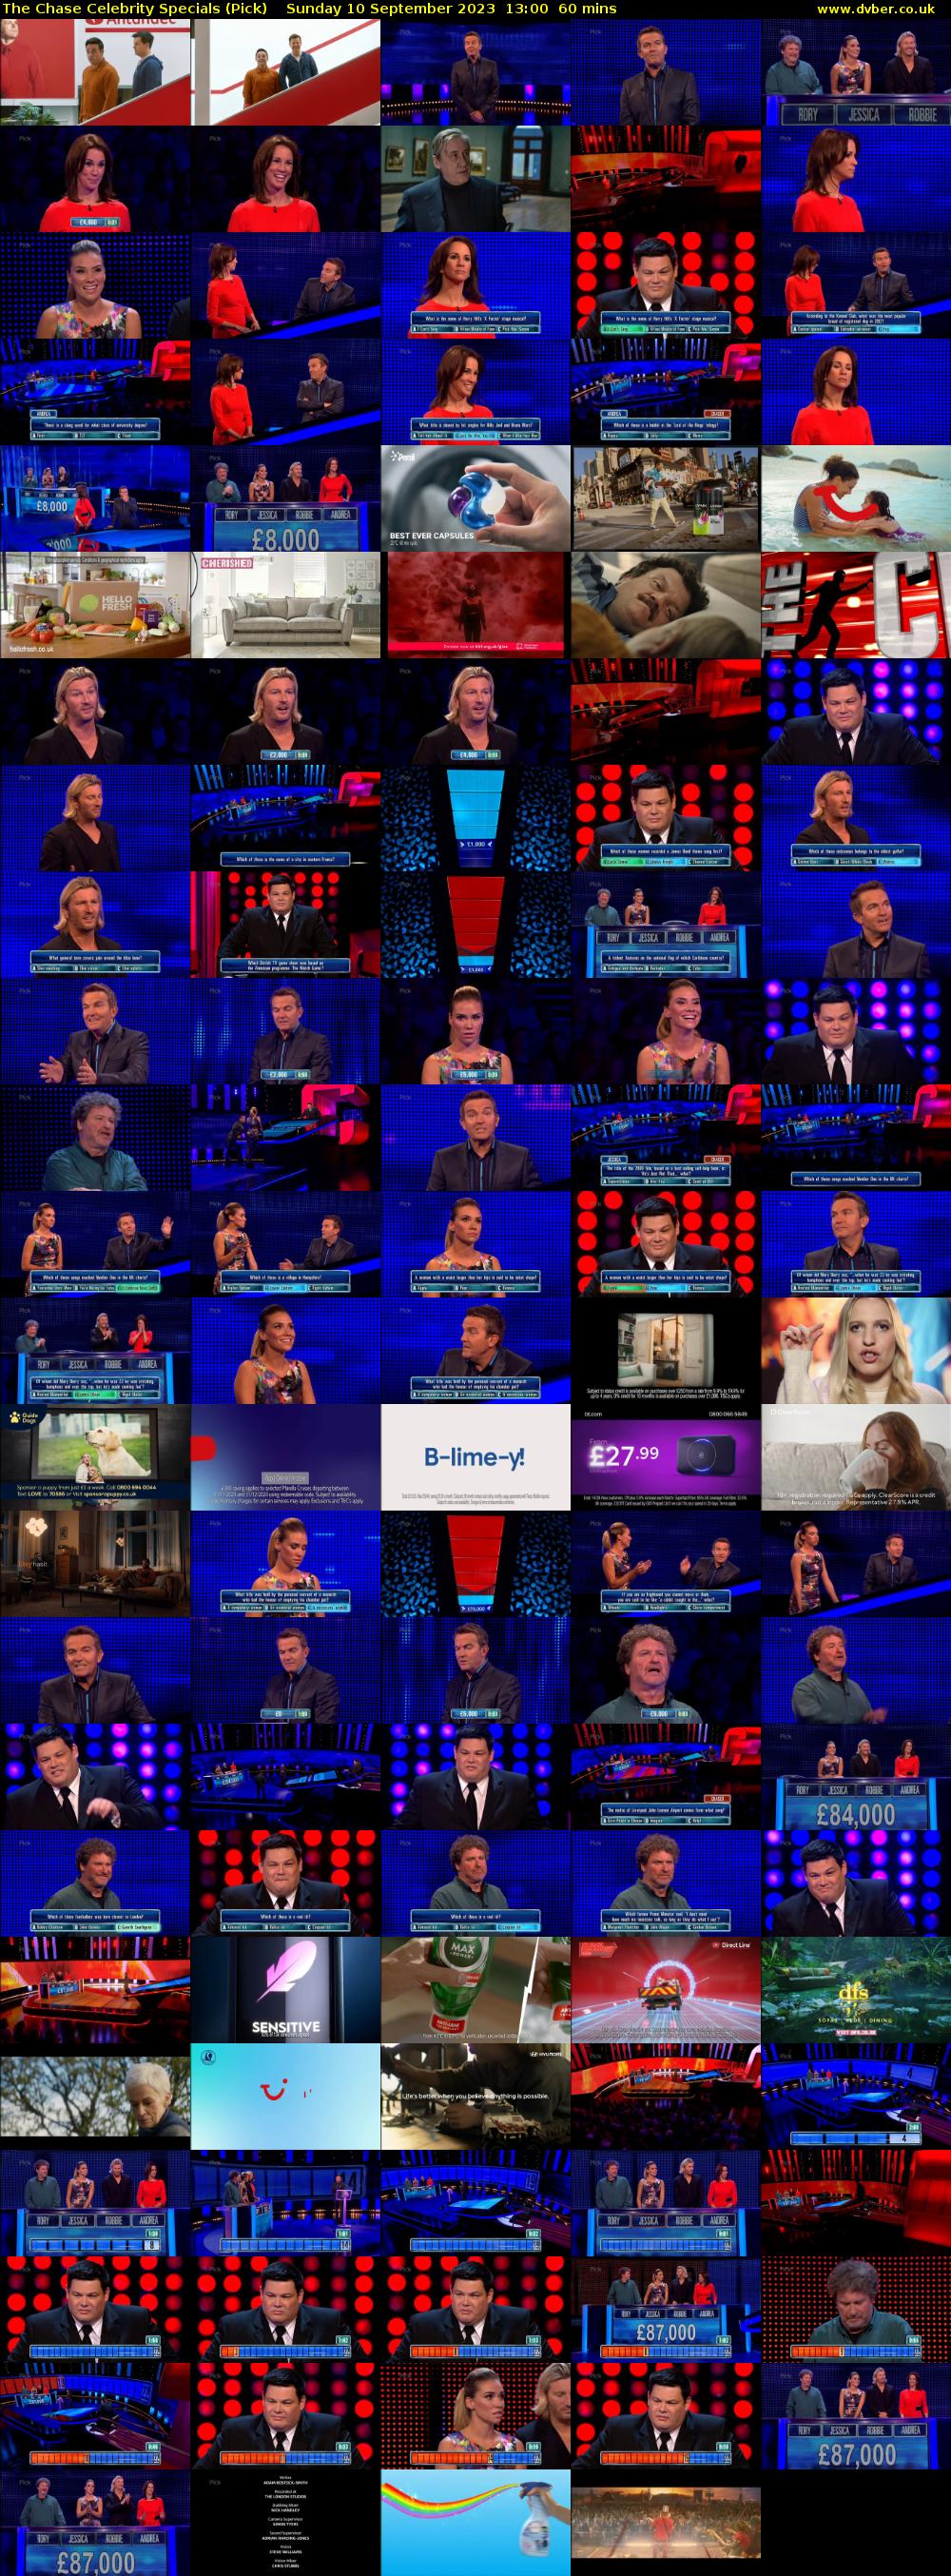 The Chase Celebrity Specials (Pick) Sunday 10 September 2023 13:00 - 14:00